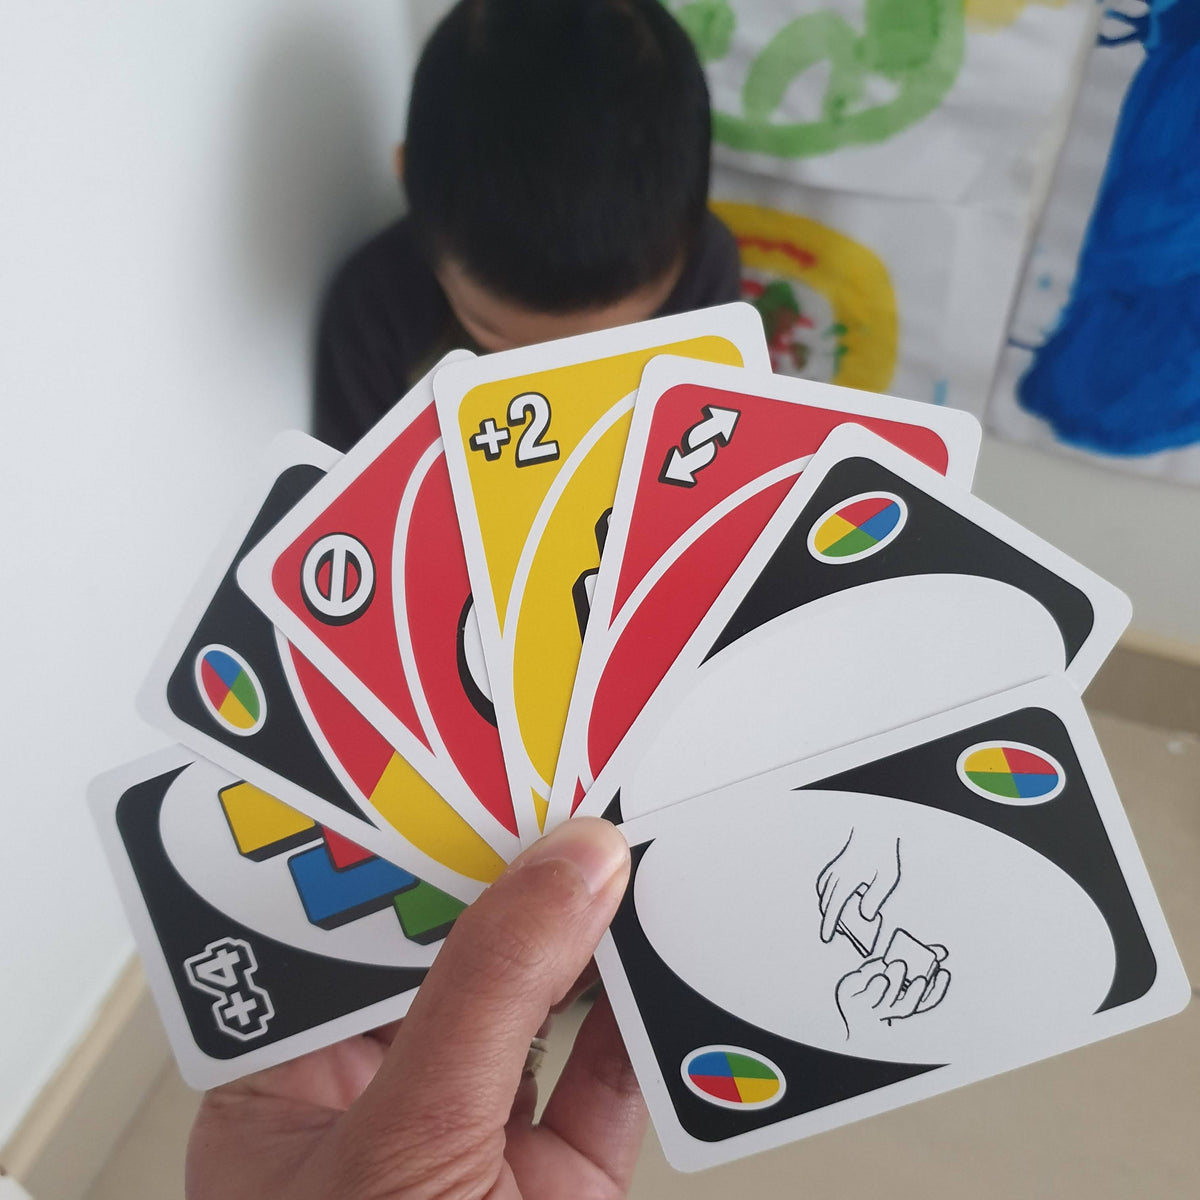 UNO - Play with LOVE.